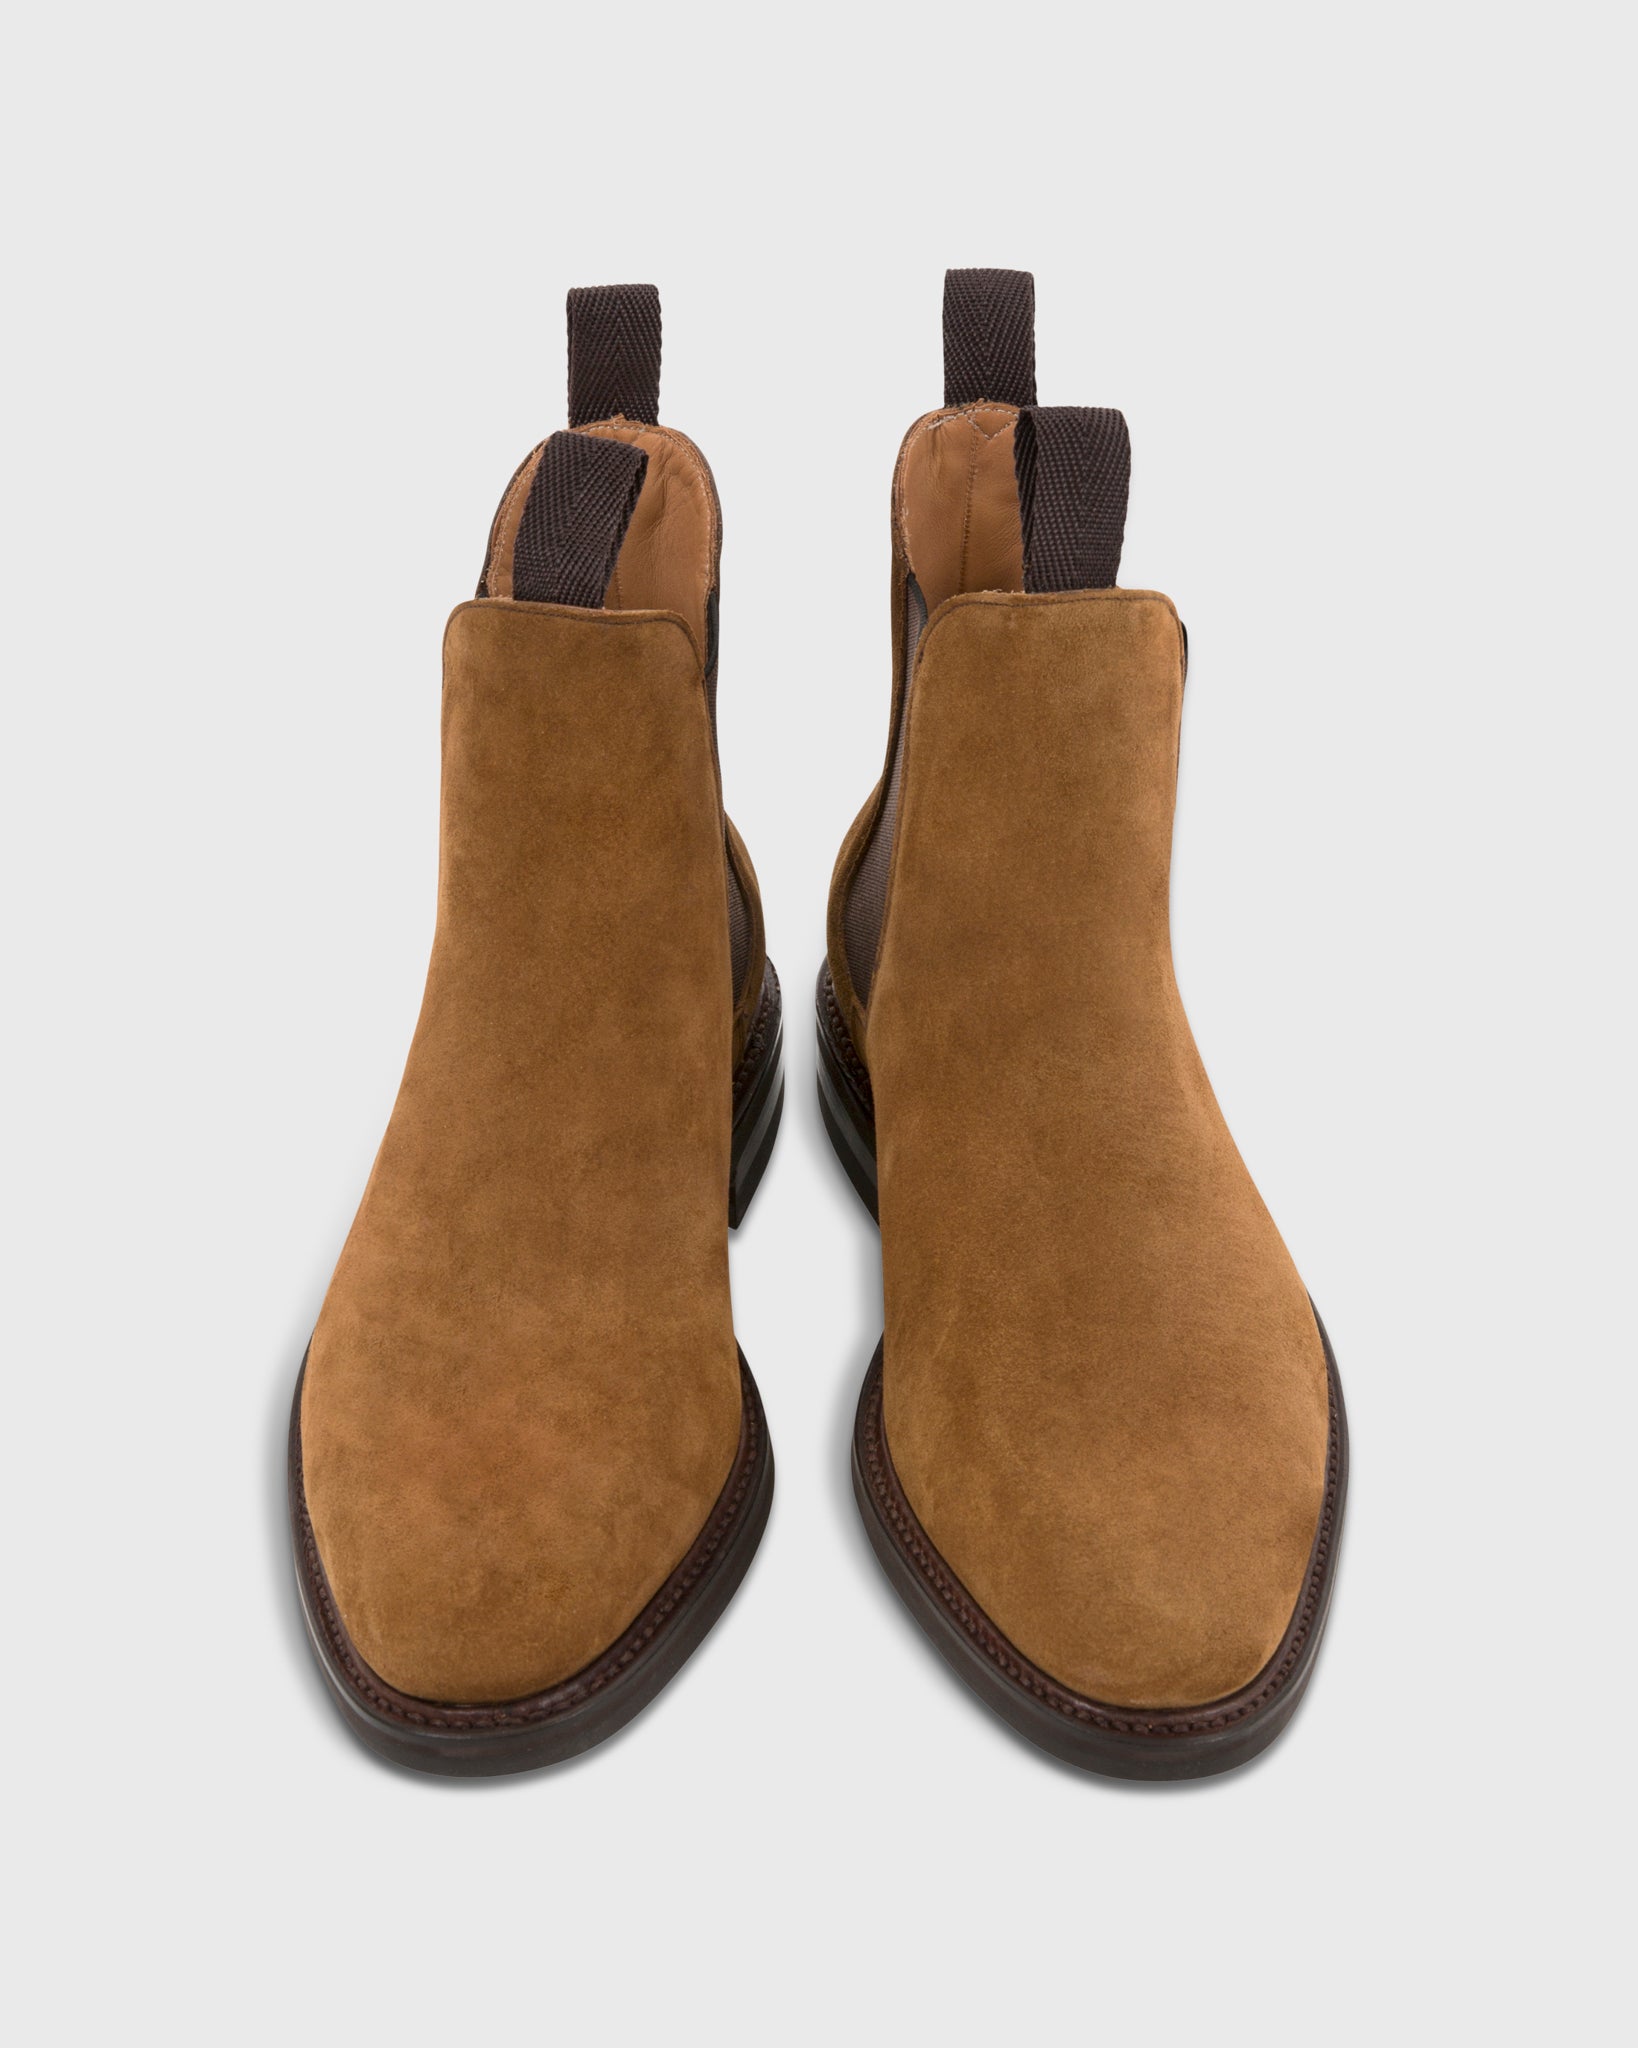 Chelsea Boot in Tobacco Suede